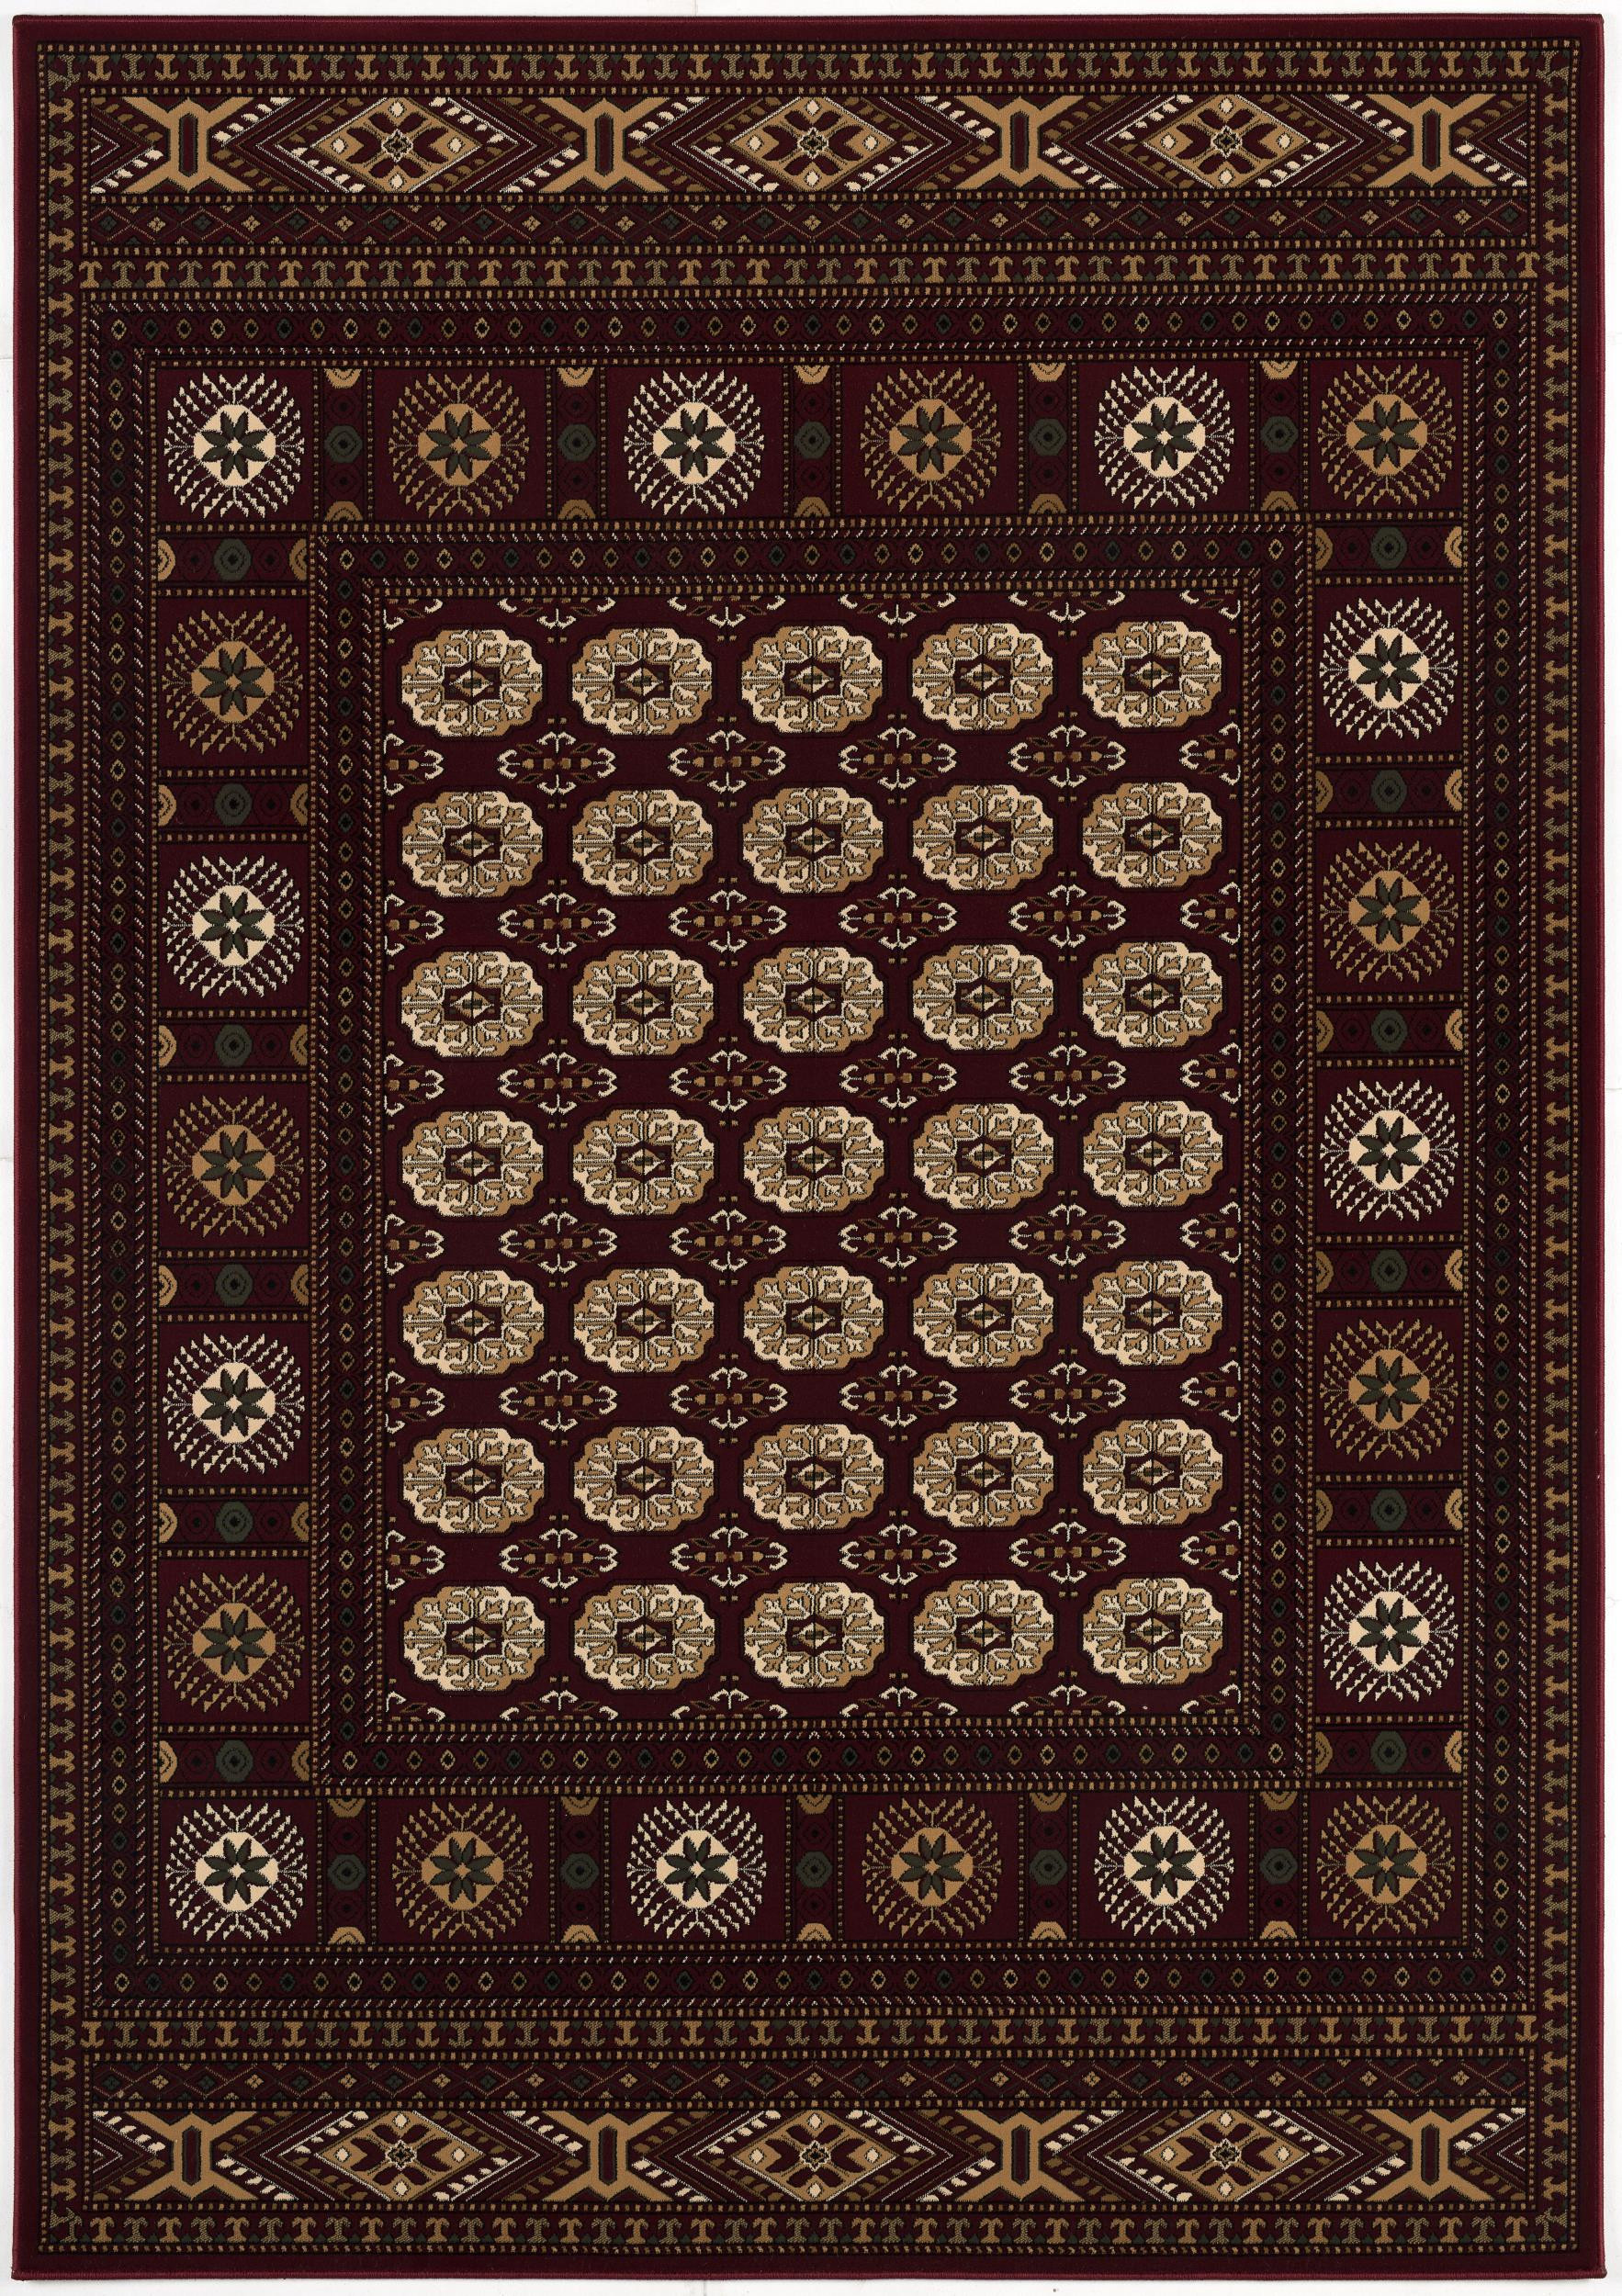 7’ x 9’ Red Eclectic Geometric Pattern Area Rug-395471-1